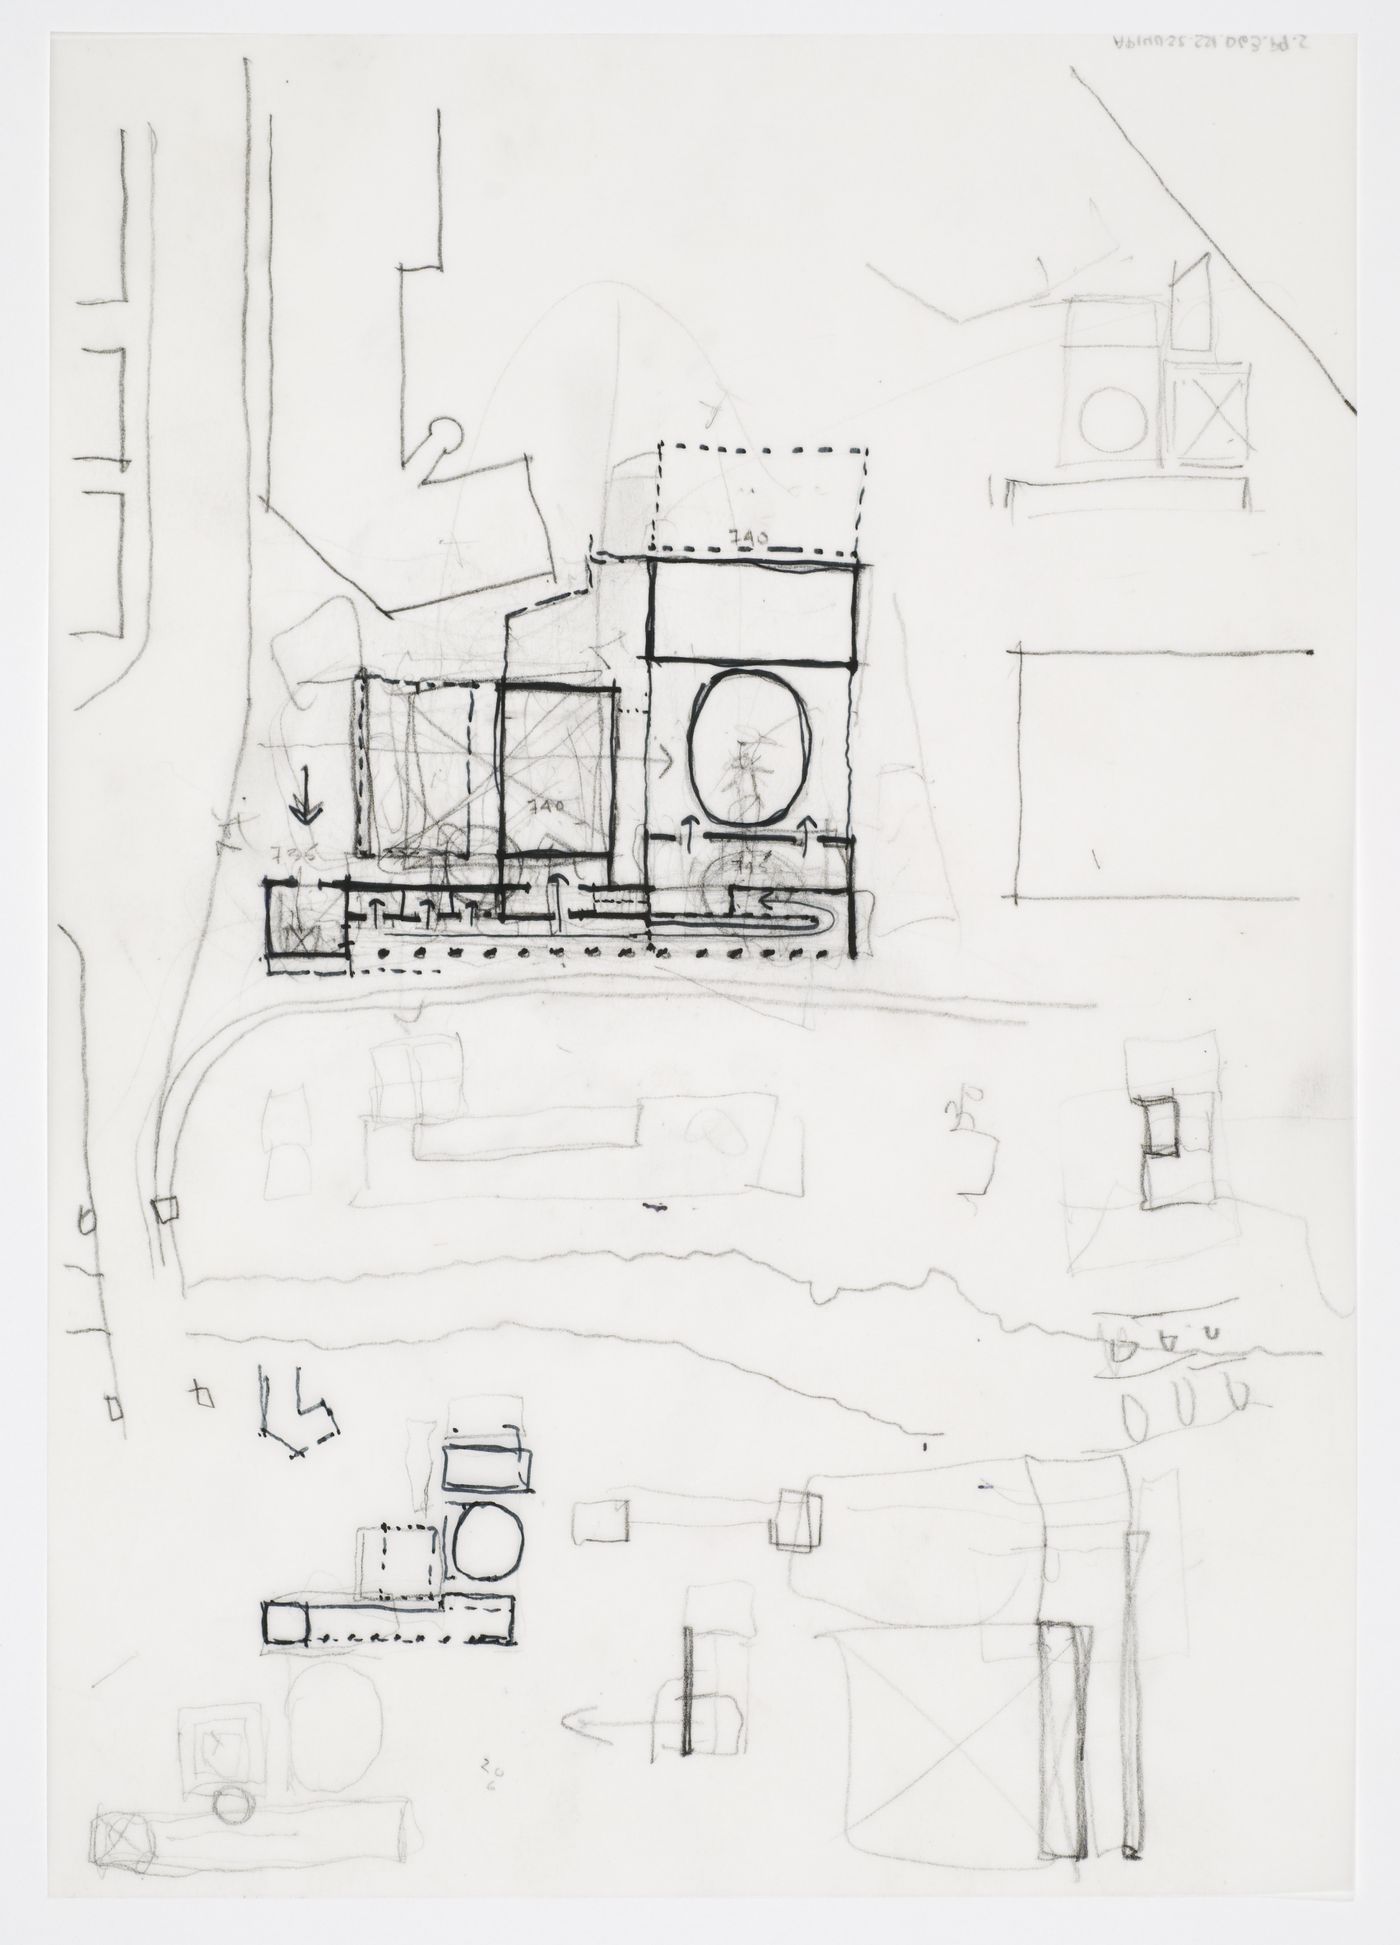 Center for Theatre Arts, Cornell University, Ithaca, New York: site plan and sketches